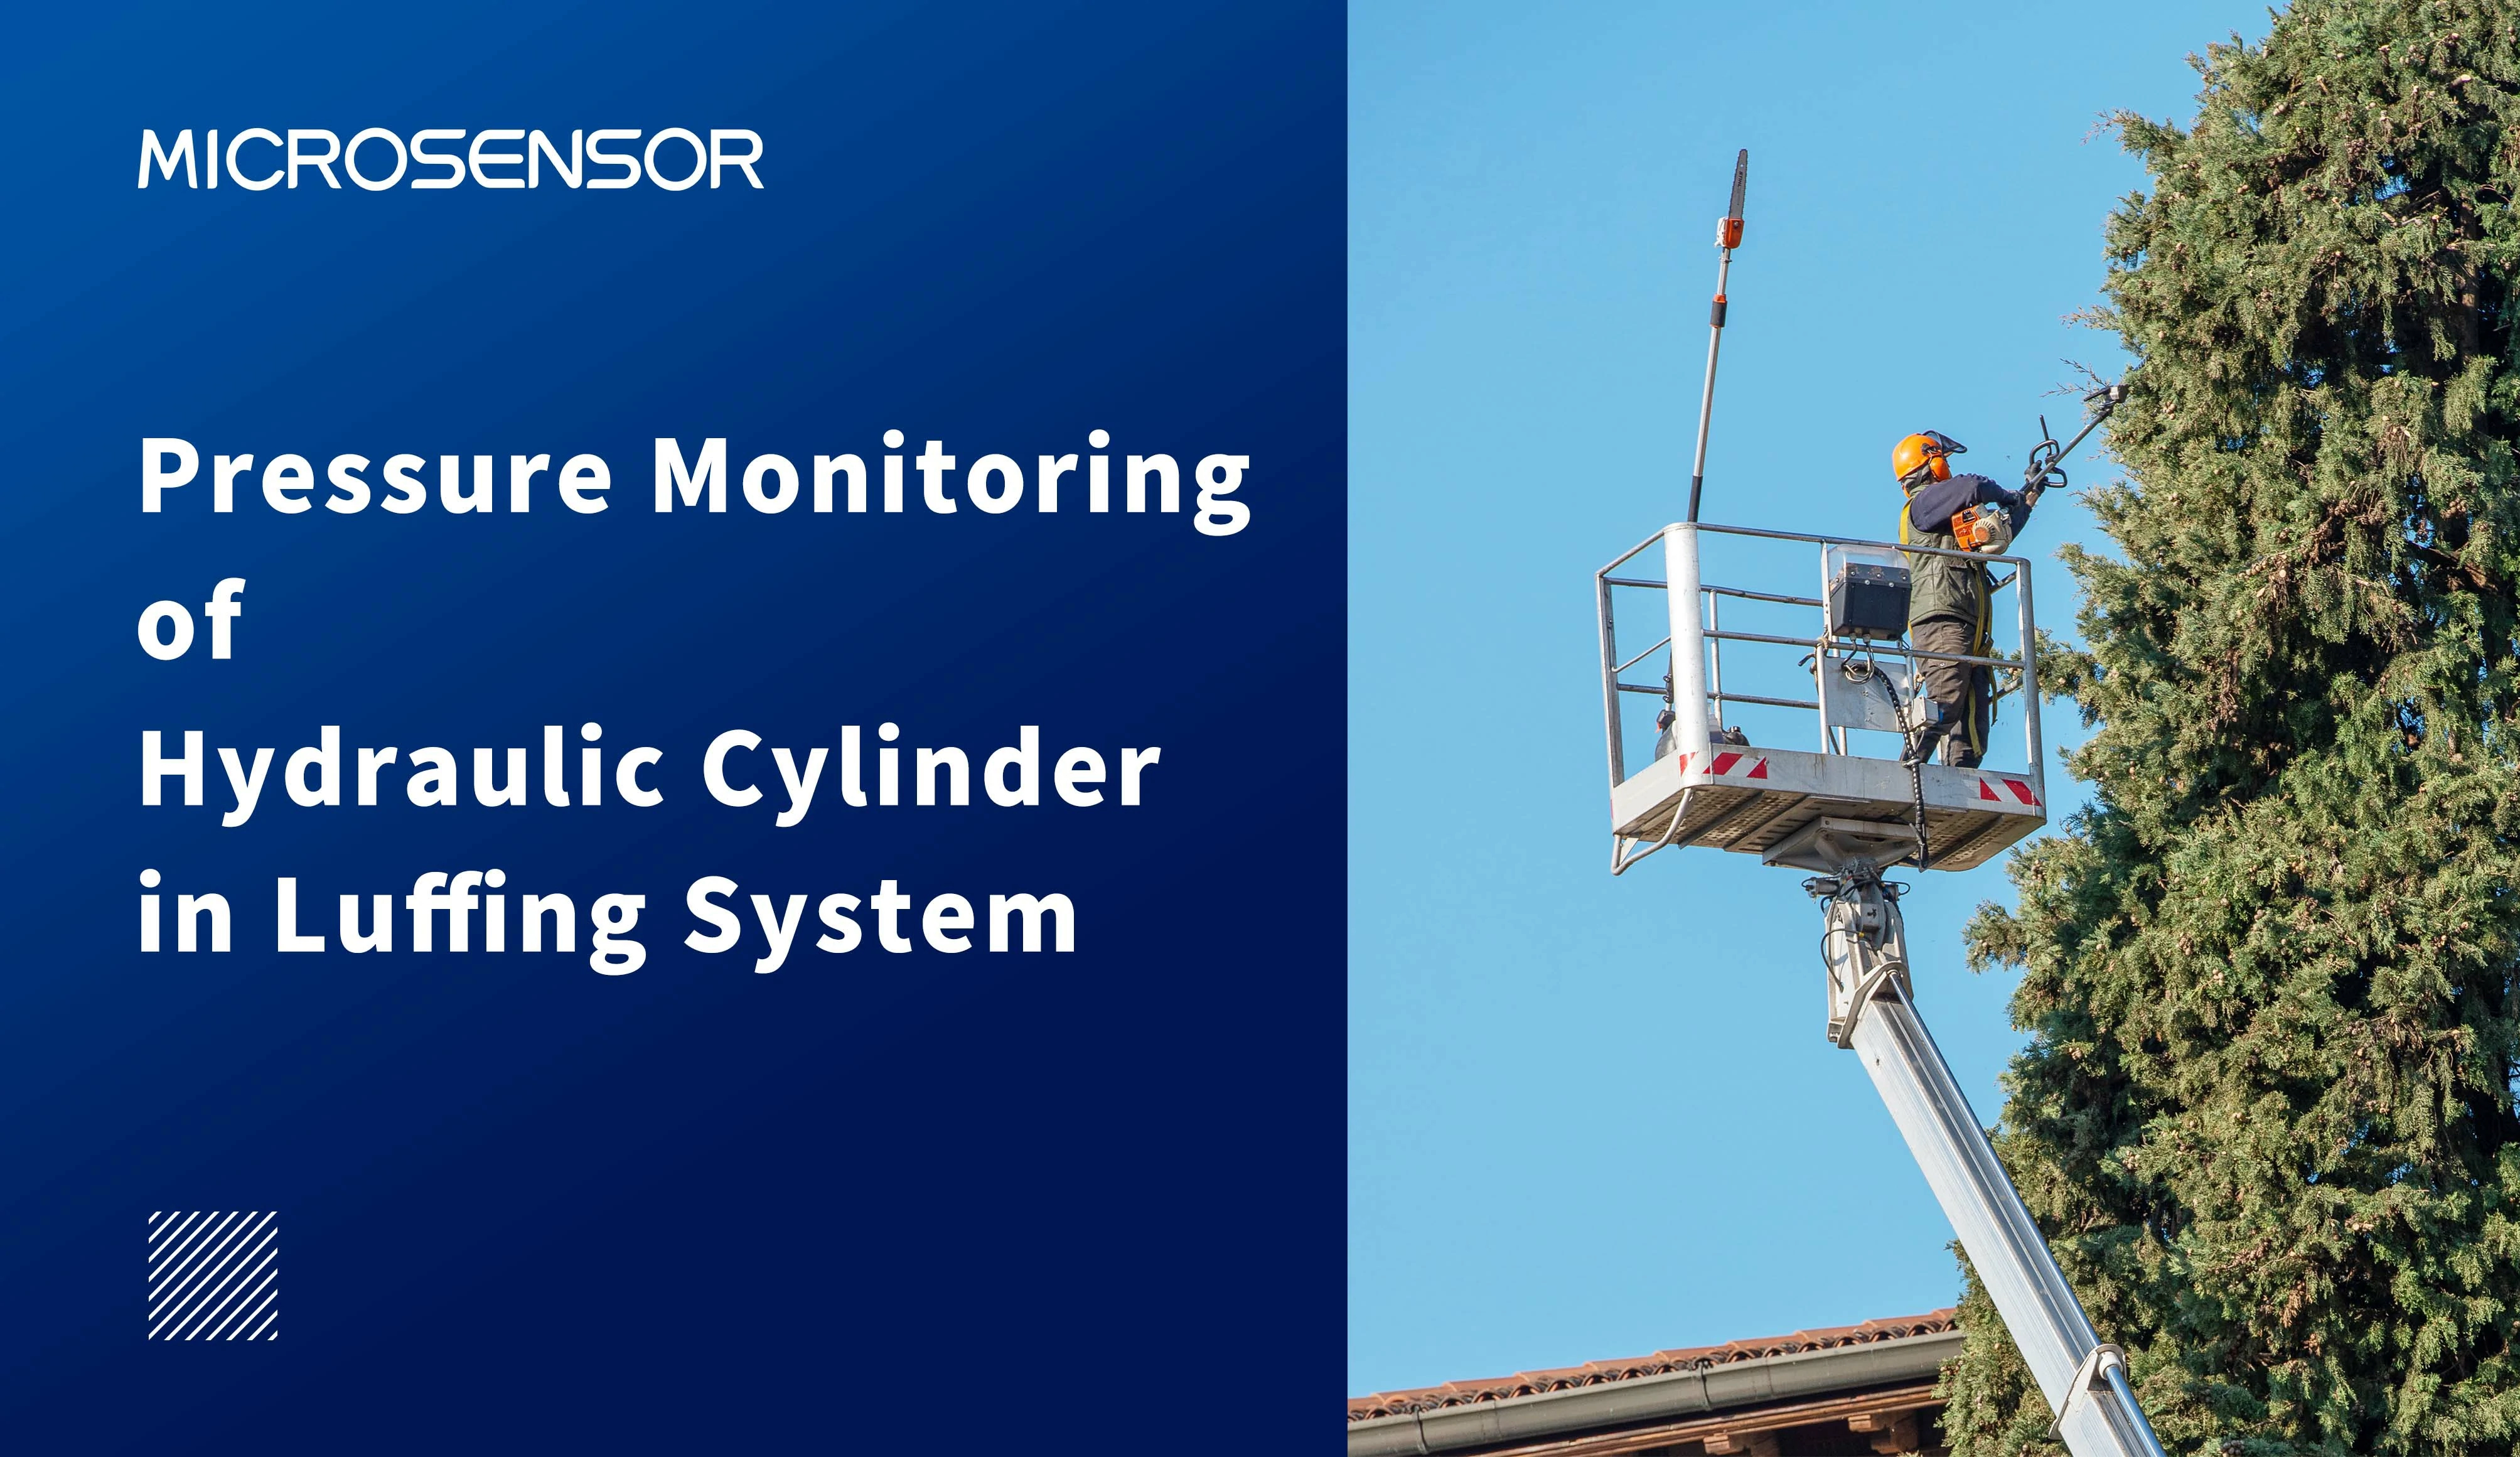 Pressure Monitoring of Hydraulic Cylinder in Luffing System